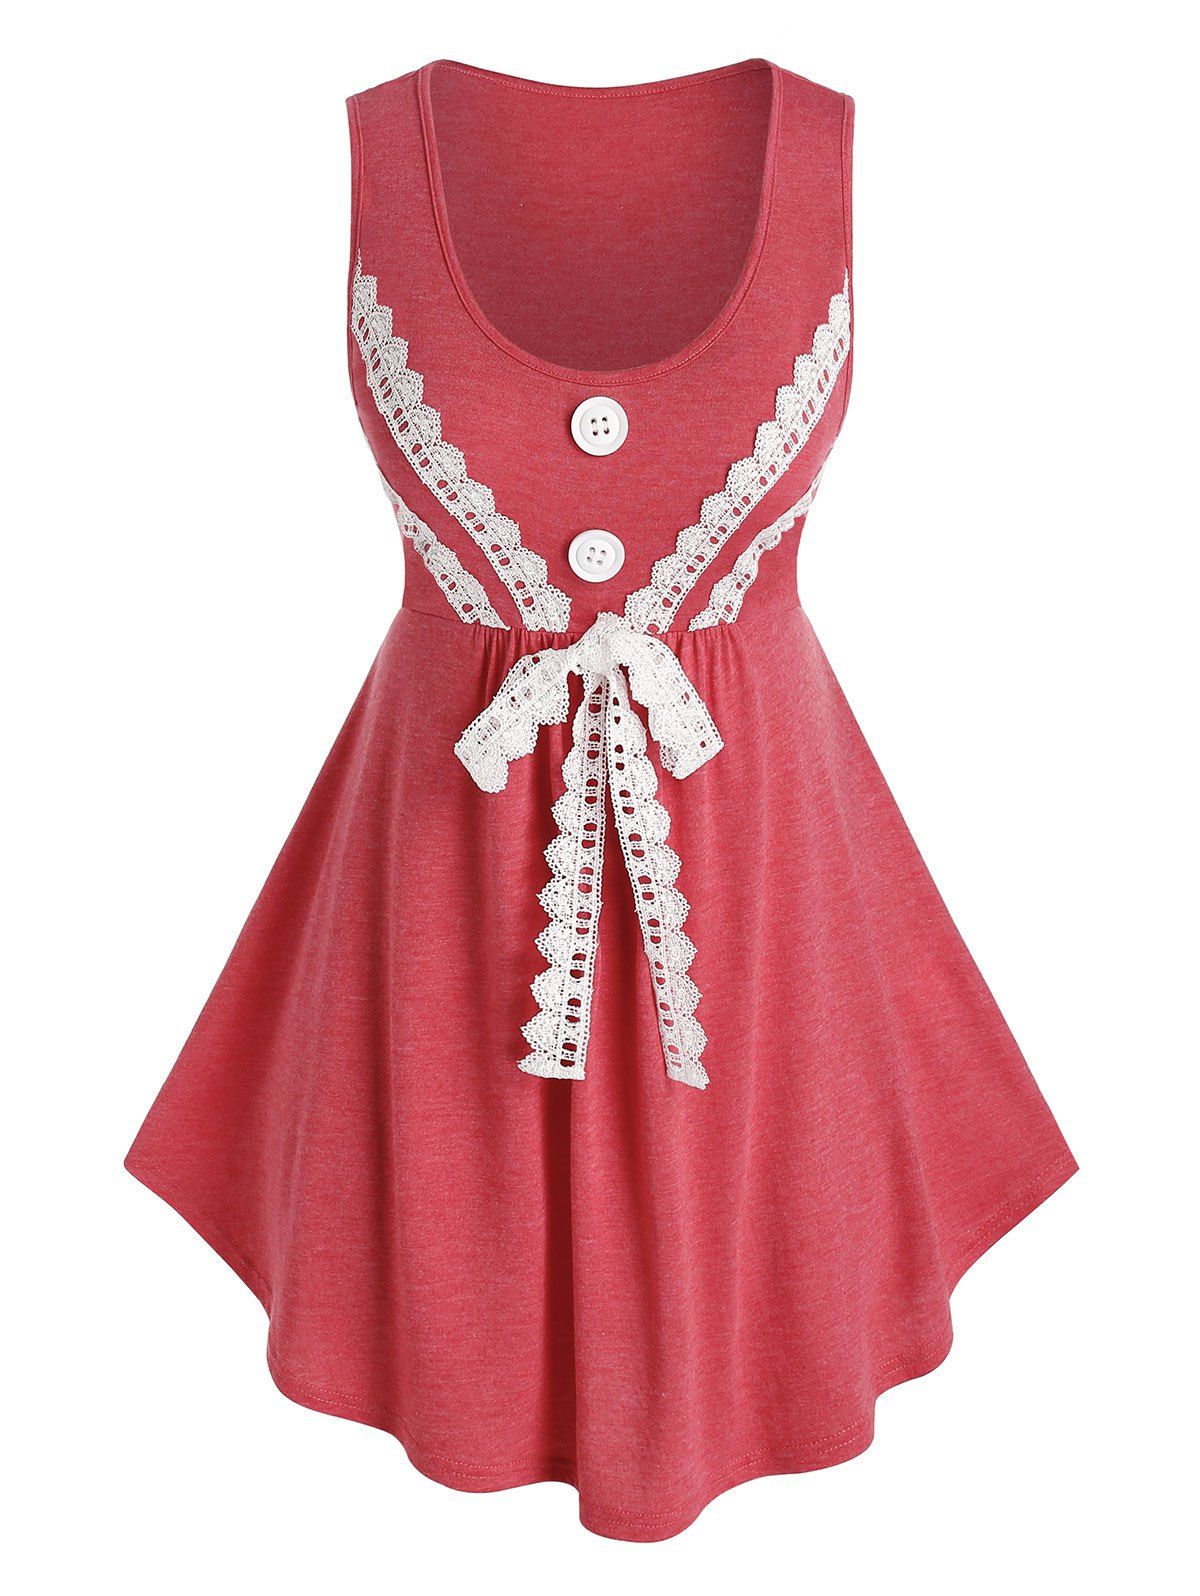 Plus Size Button Lace Bowknot Tank Top - RED 5X